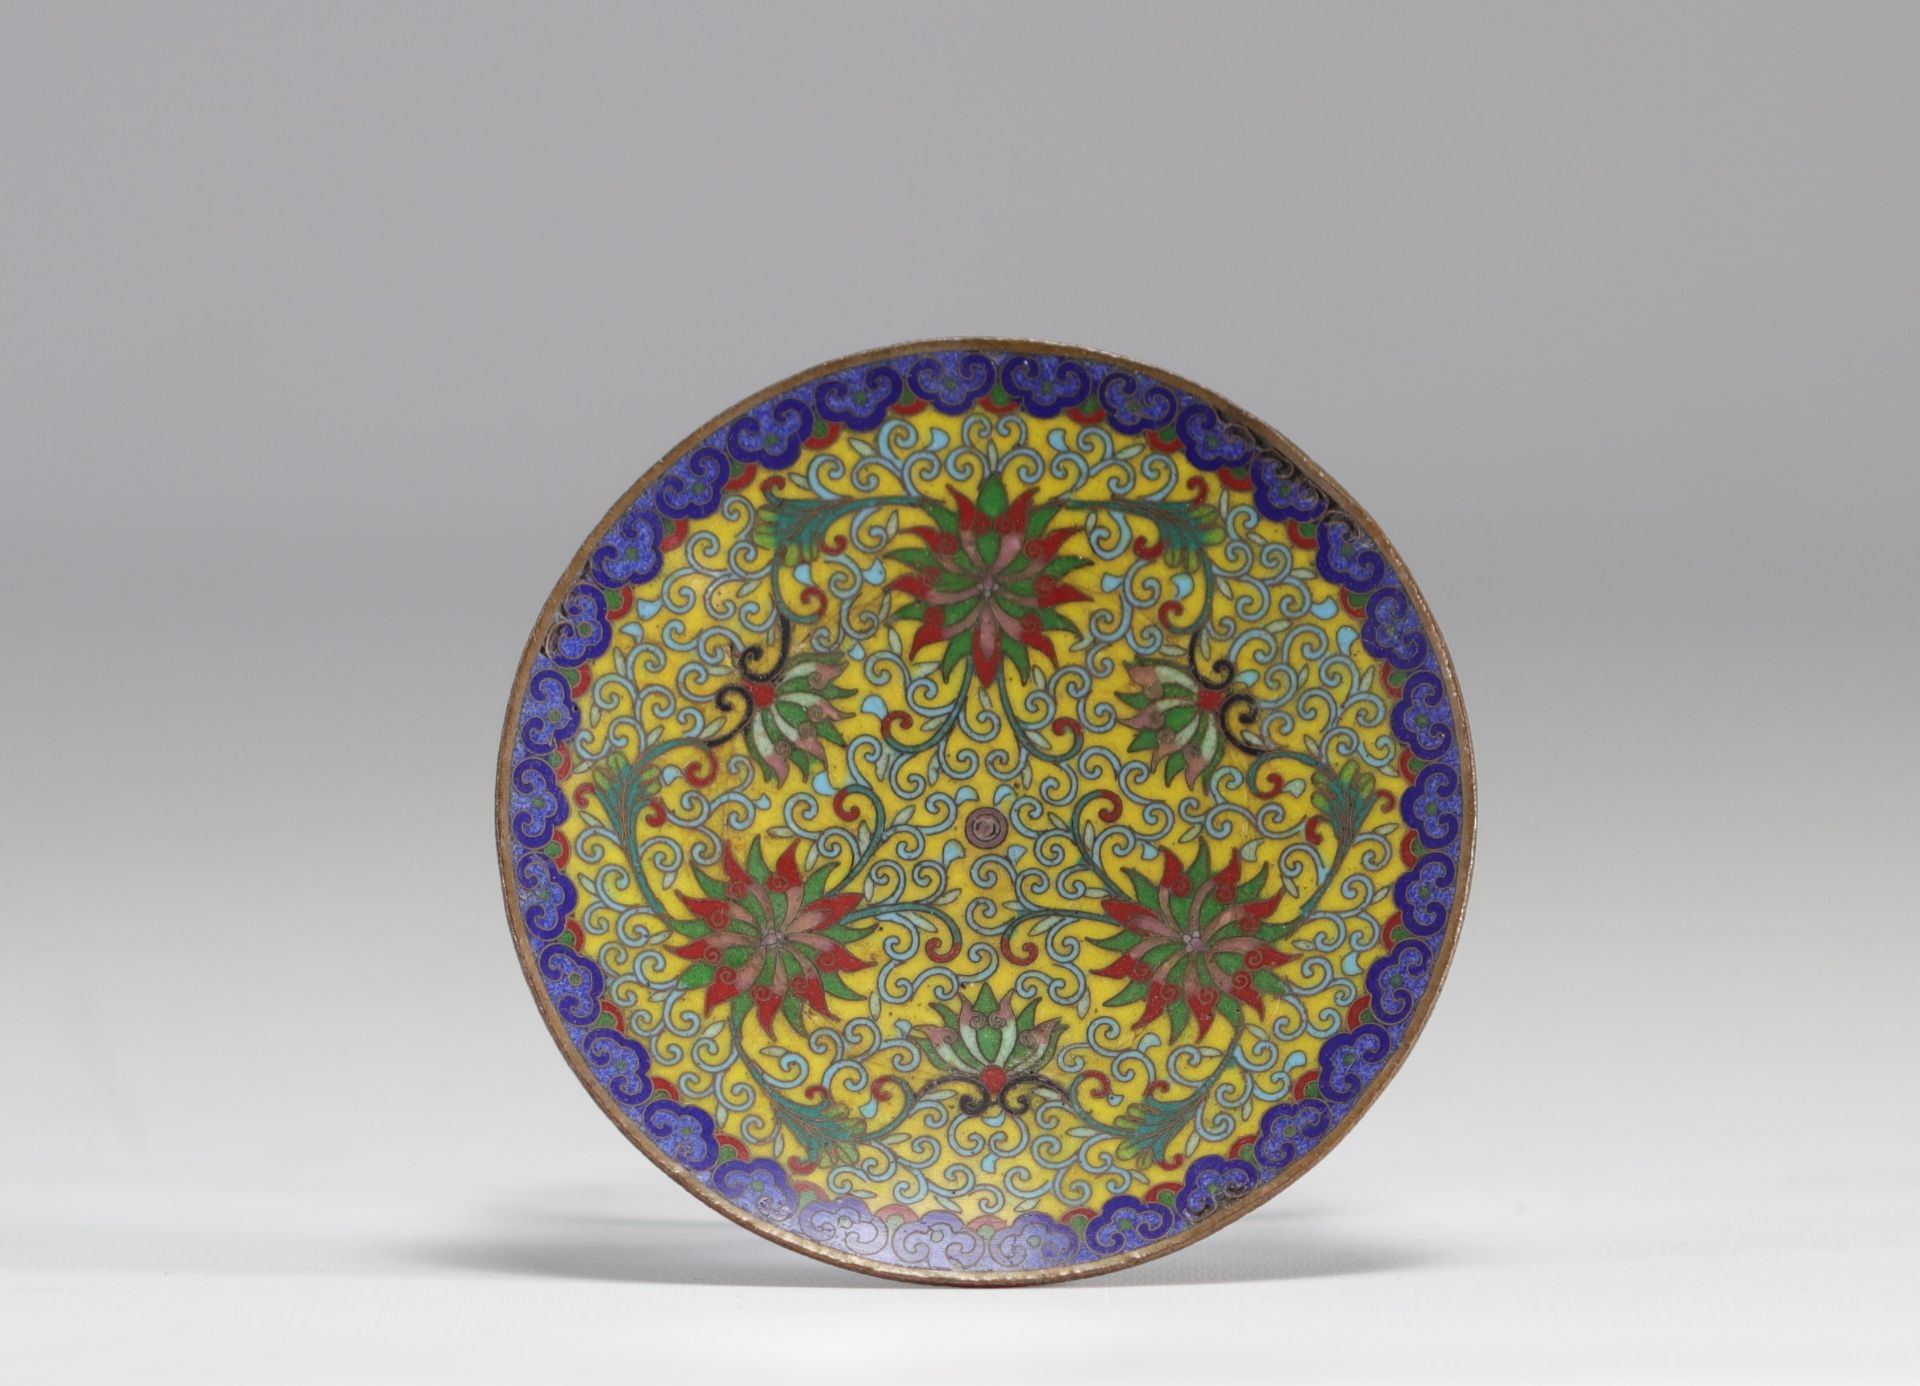 A cloisonne enamel dish with flowers from the 19th century from Meiji period (æ˜Žæ²»æ™‚ä»£) - Image 2 of 2